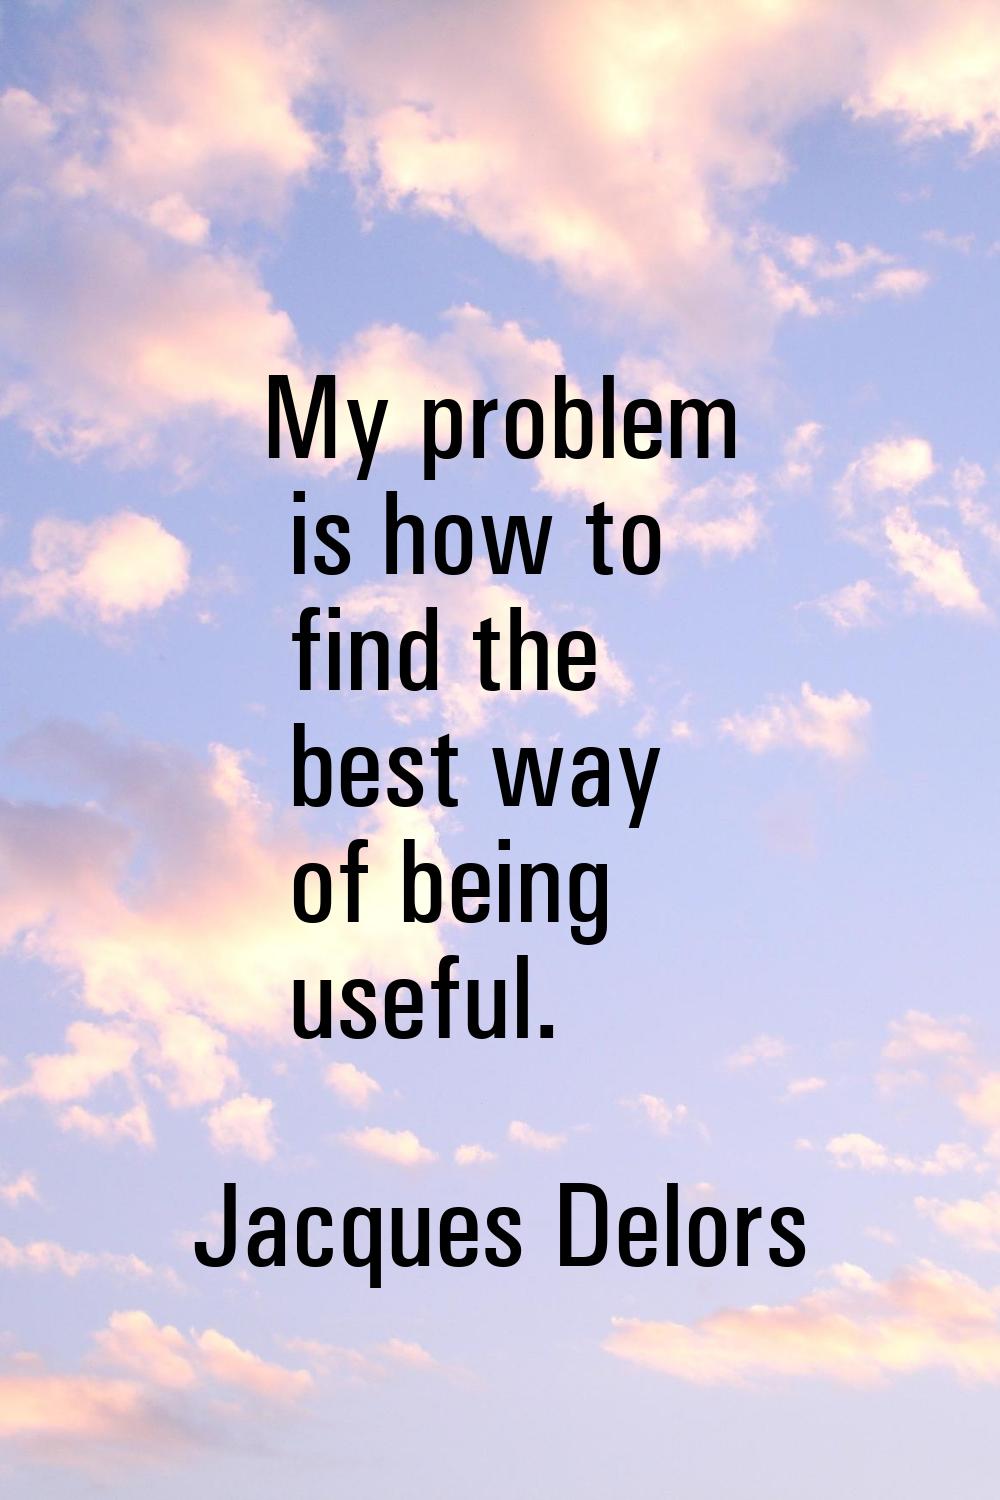 My problem is how to find the best way of being useful.